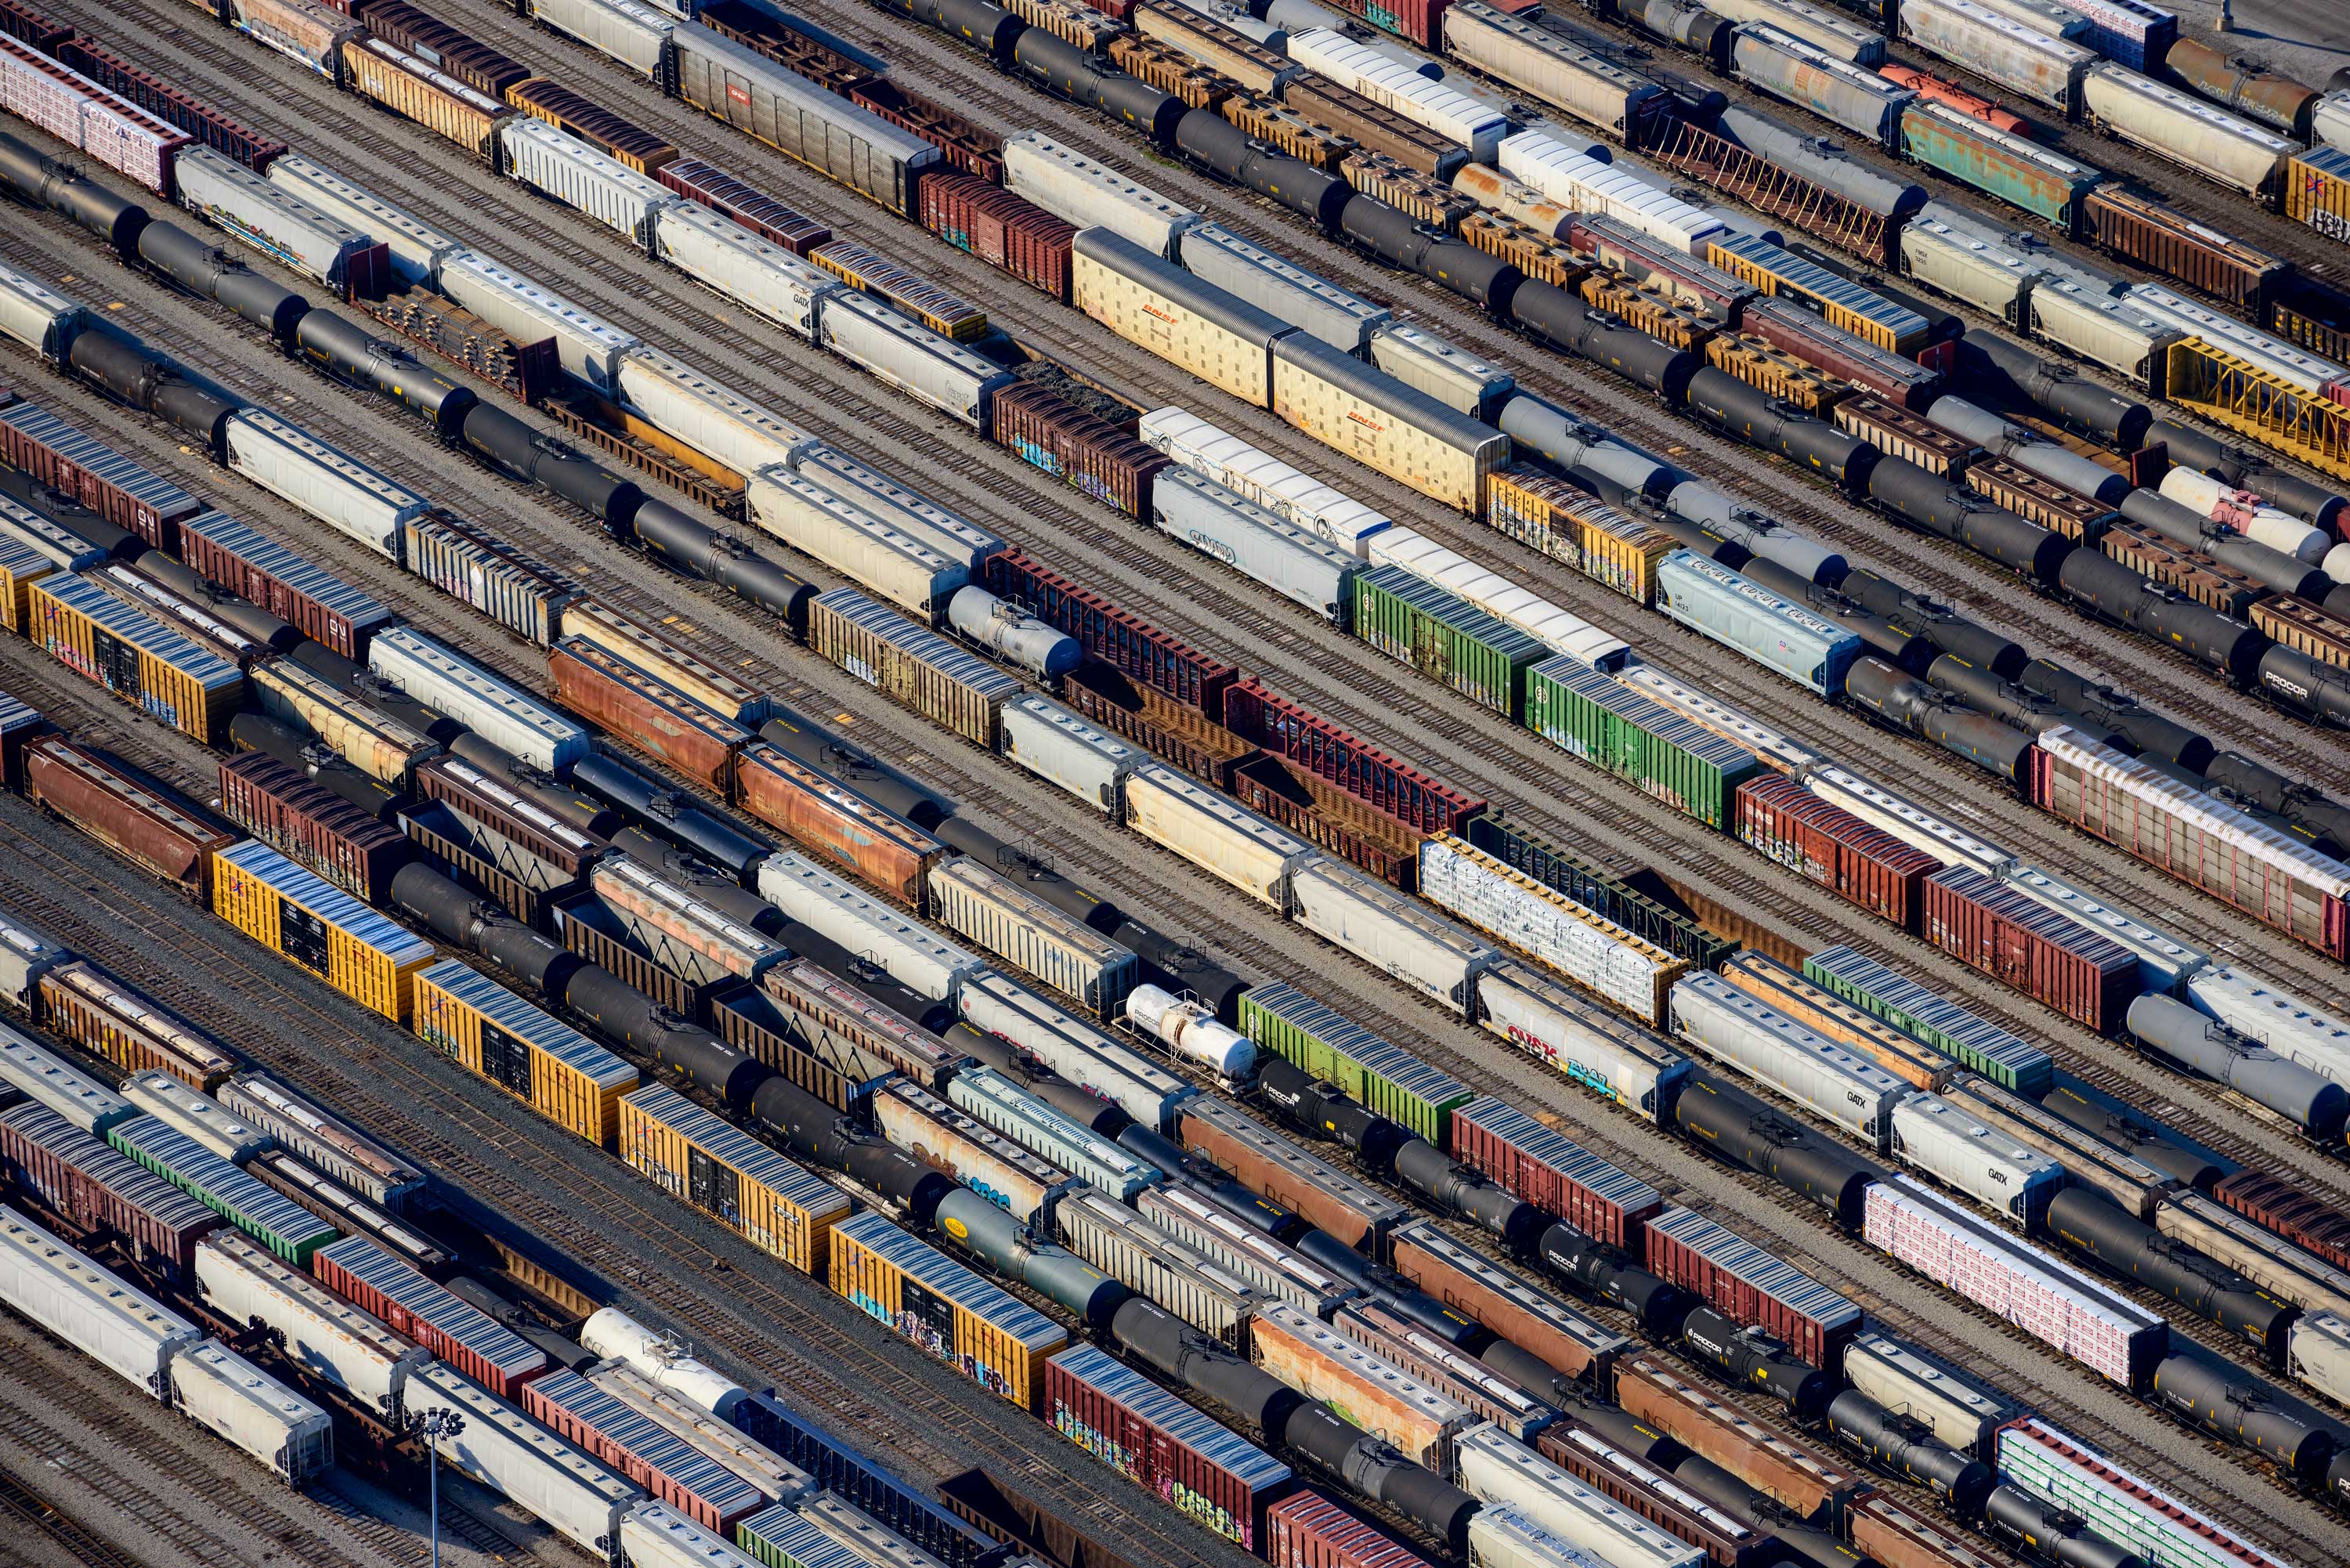 More than 8,400 rail cars a day run through lines operated by the Belt Railway Company of Chicago. (Jamey Stillings for TIME)